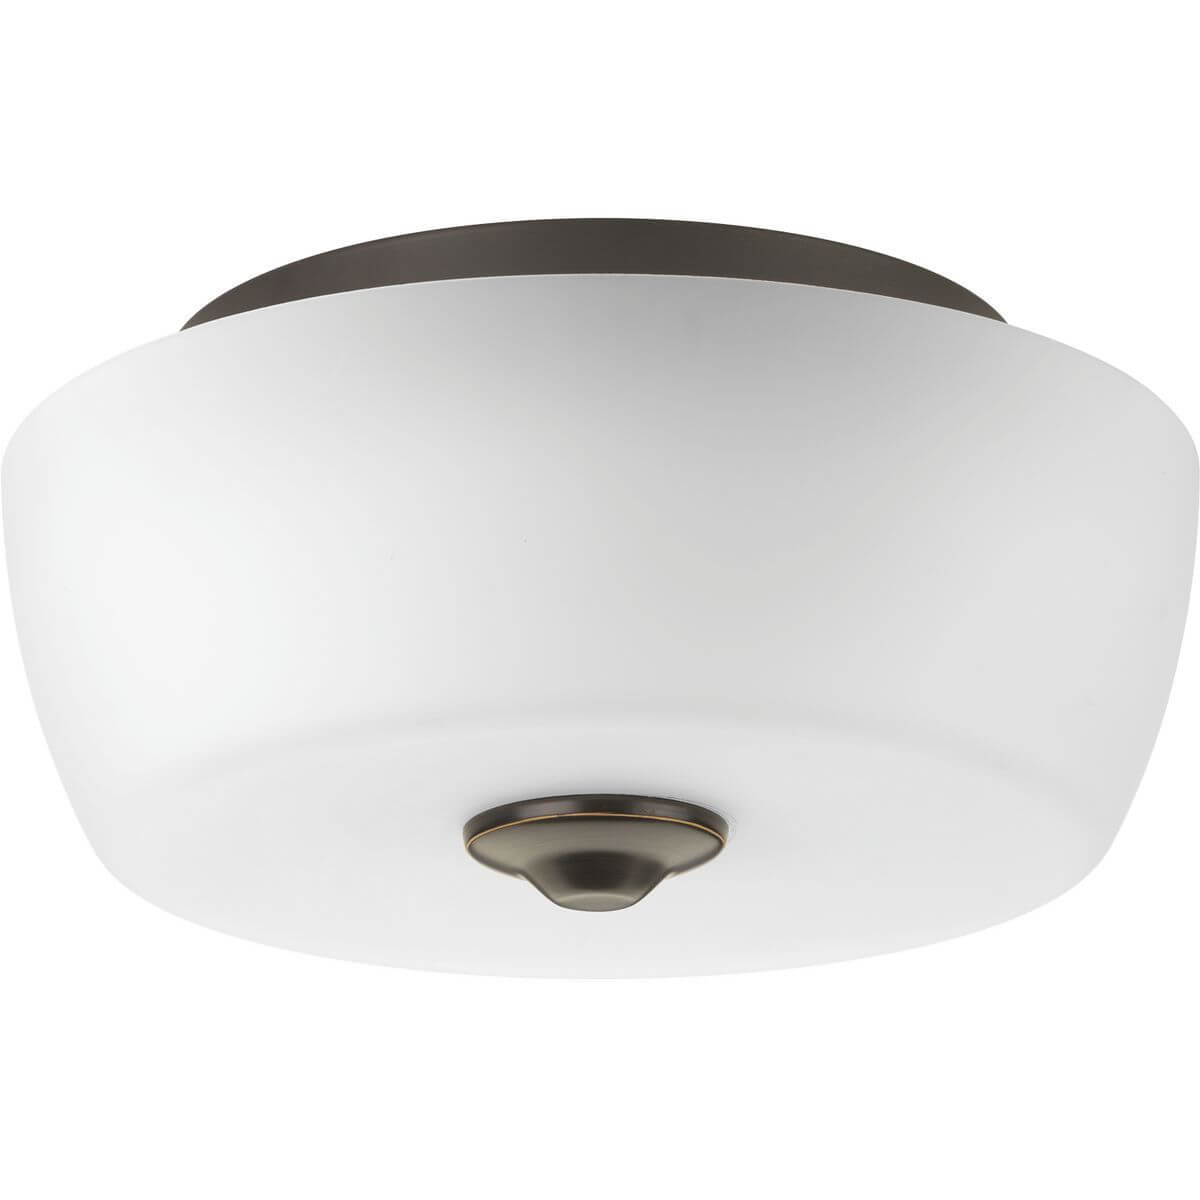 Progress Lighting Leap 2 Light 14 Inch Flush Mount In Antique Bronze With Etched Opal Glass P350061-020